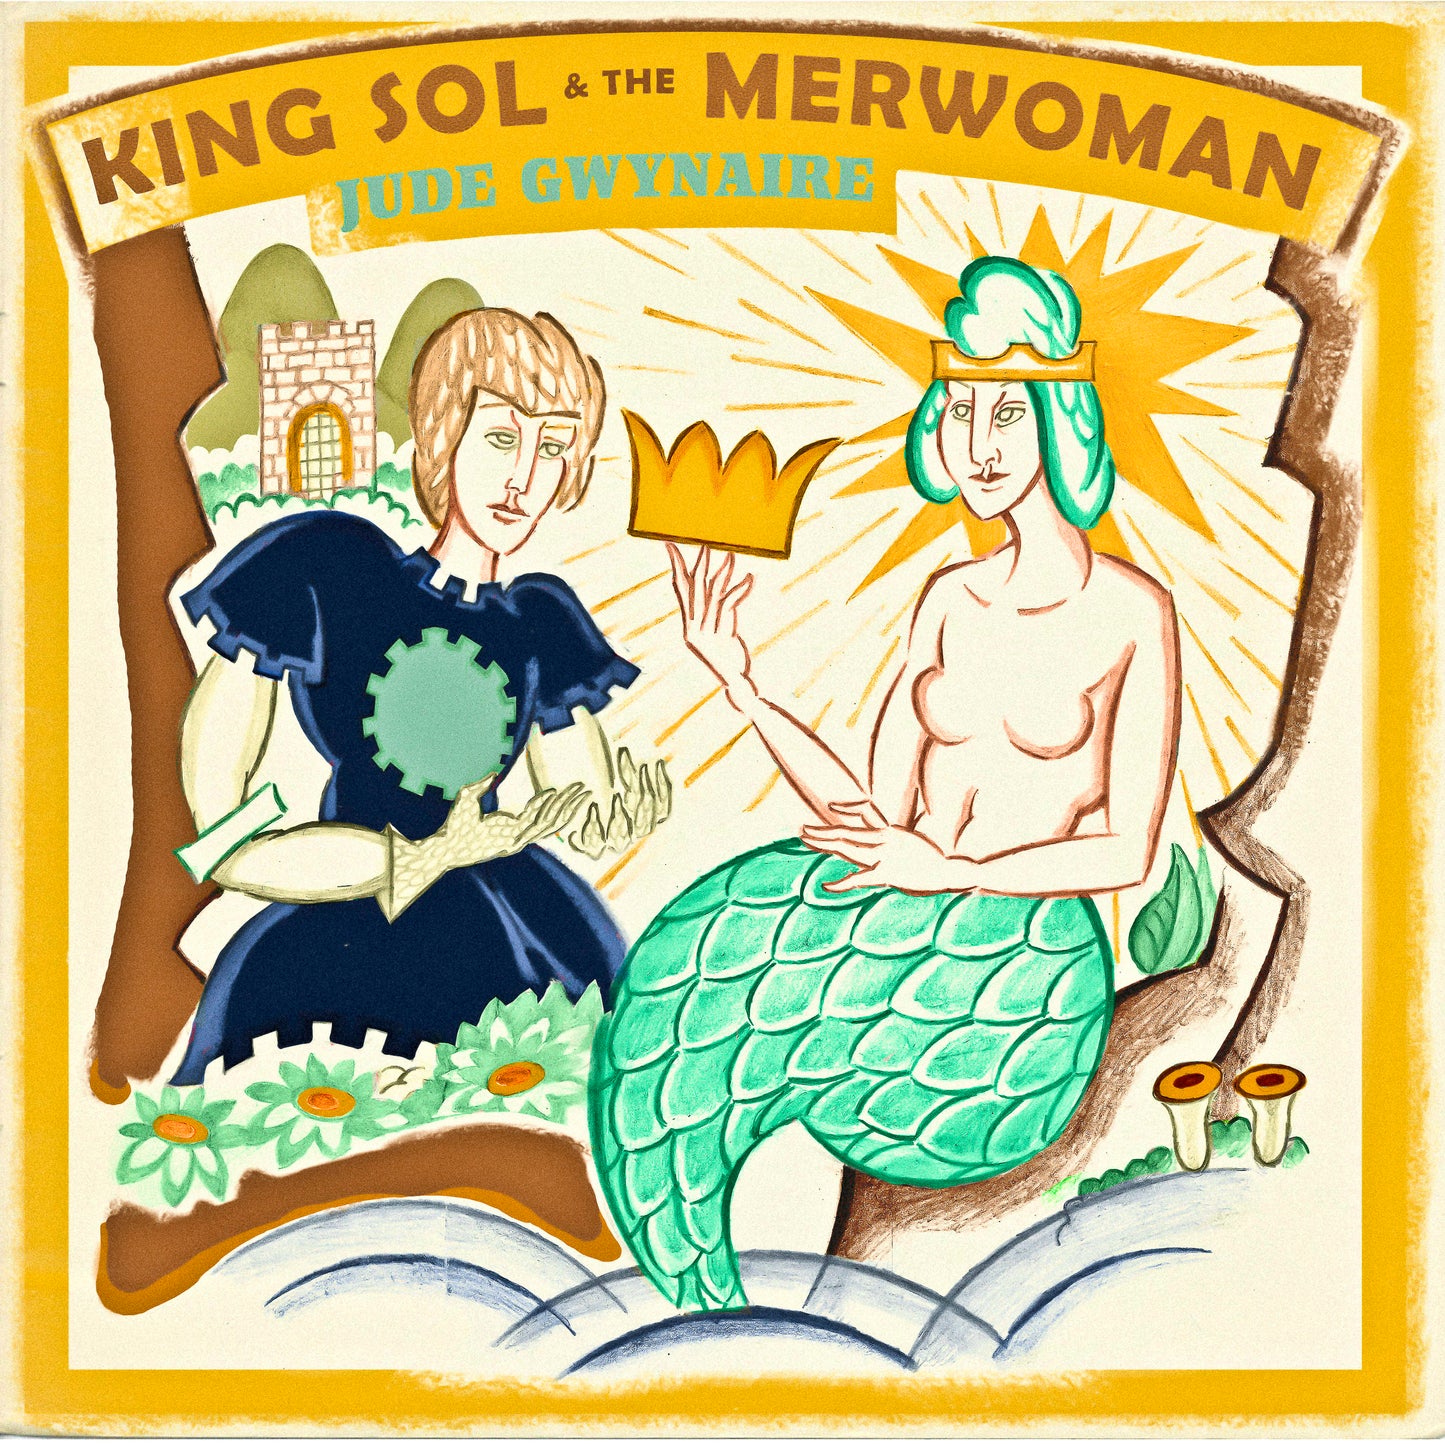 King Sol and the Merwoman